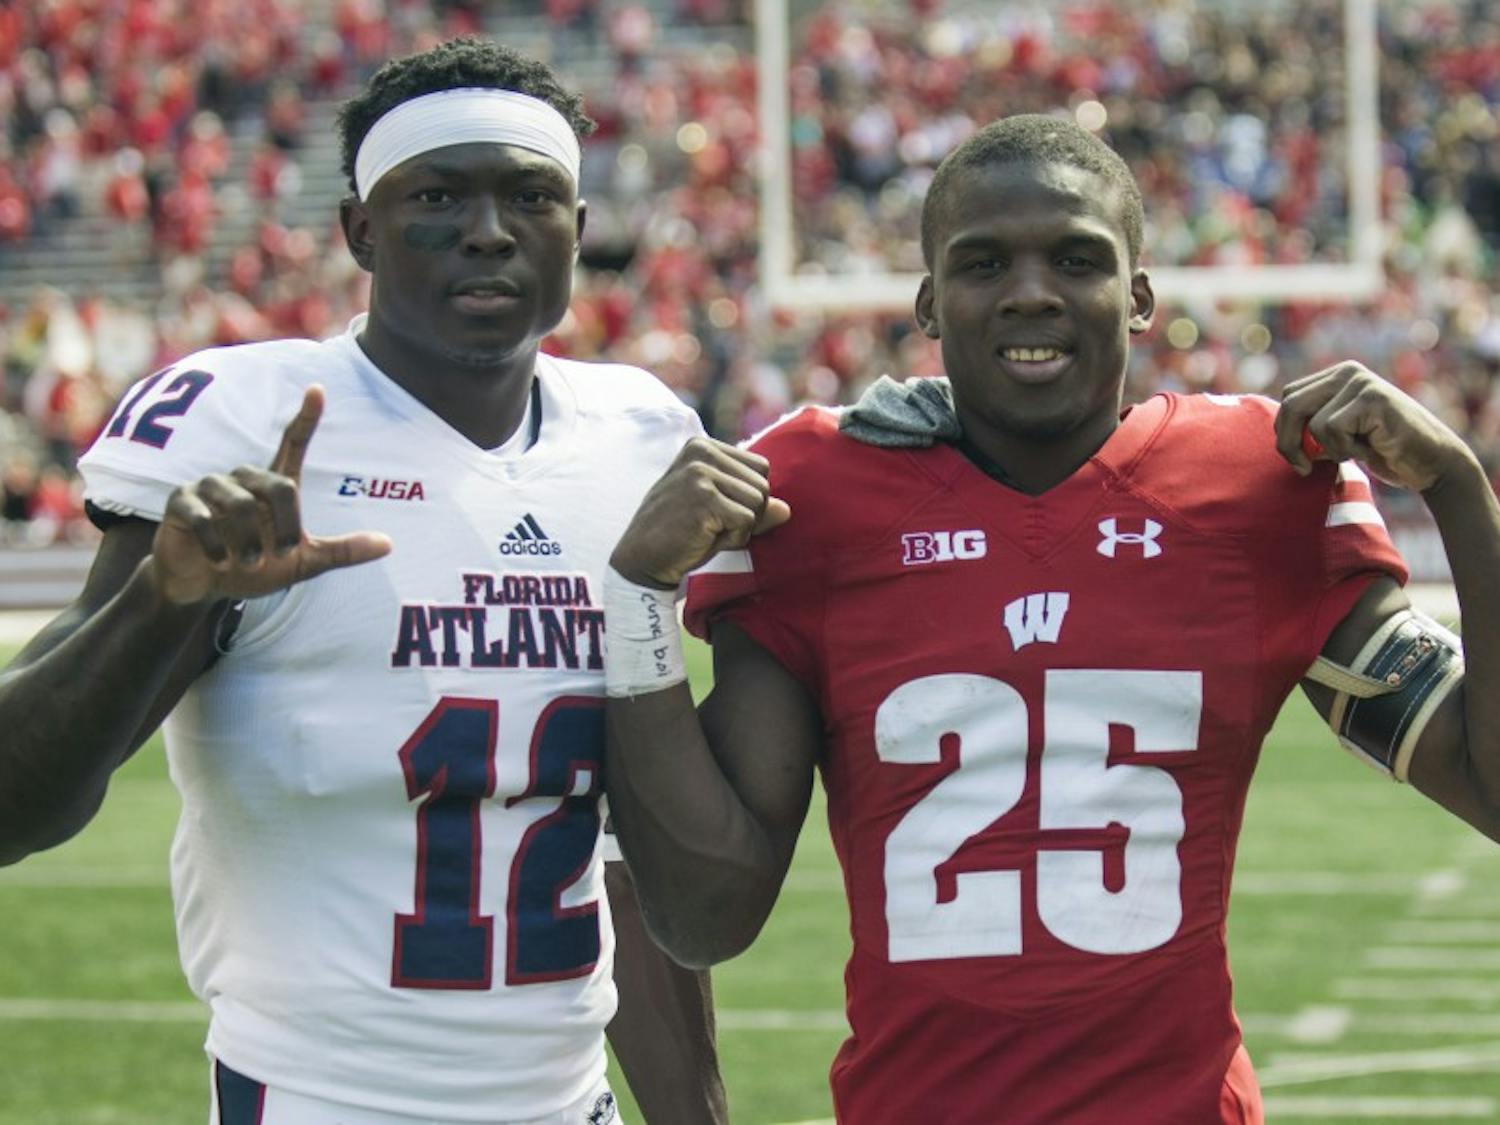 Derrick Tindal (right) poses with John Franklin III (left) after Wisconsin's 31-14 win over Florida Atlantic in early September. Both players are from Fort Lauderdale, Fla.&nbsp;